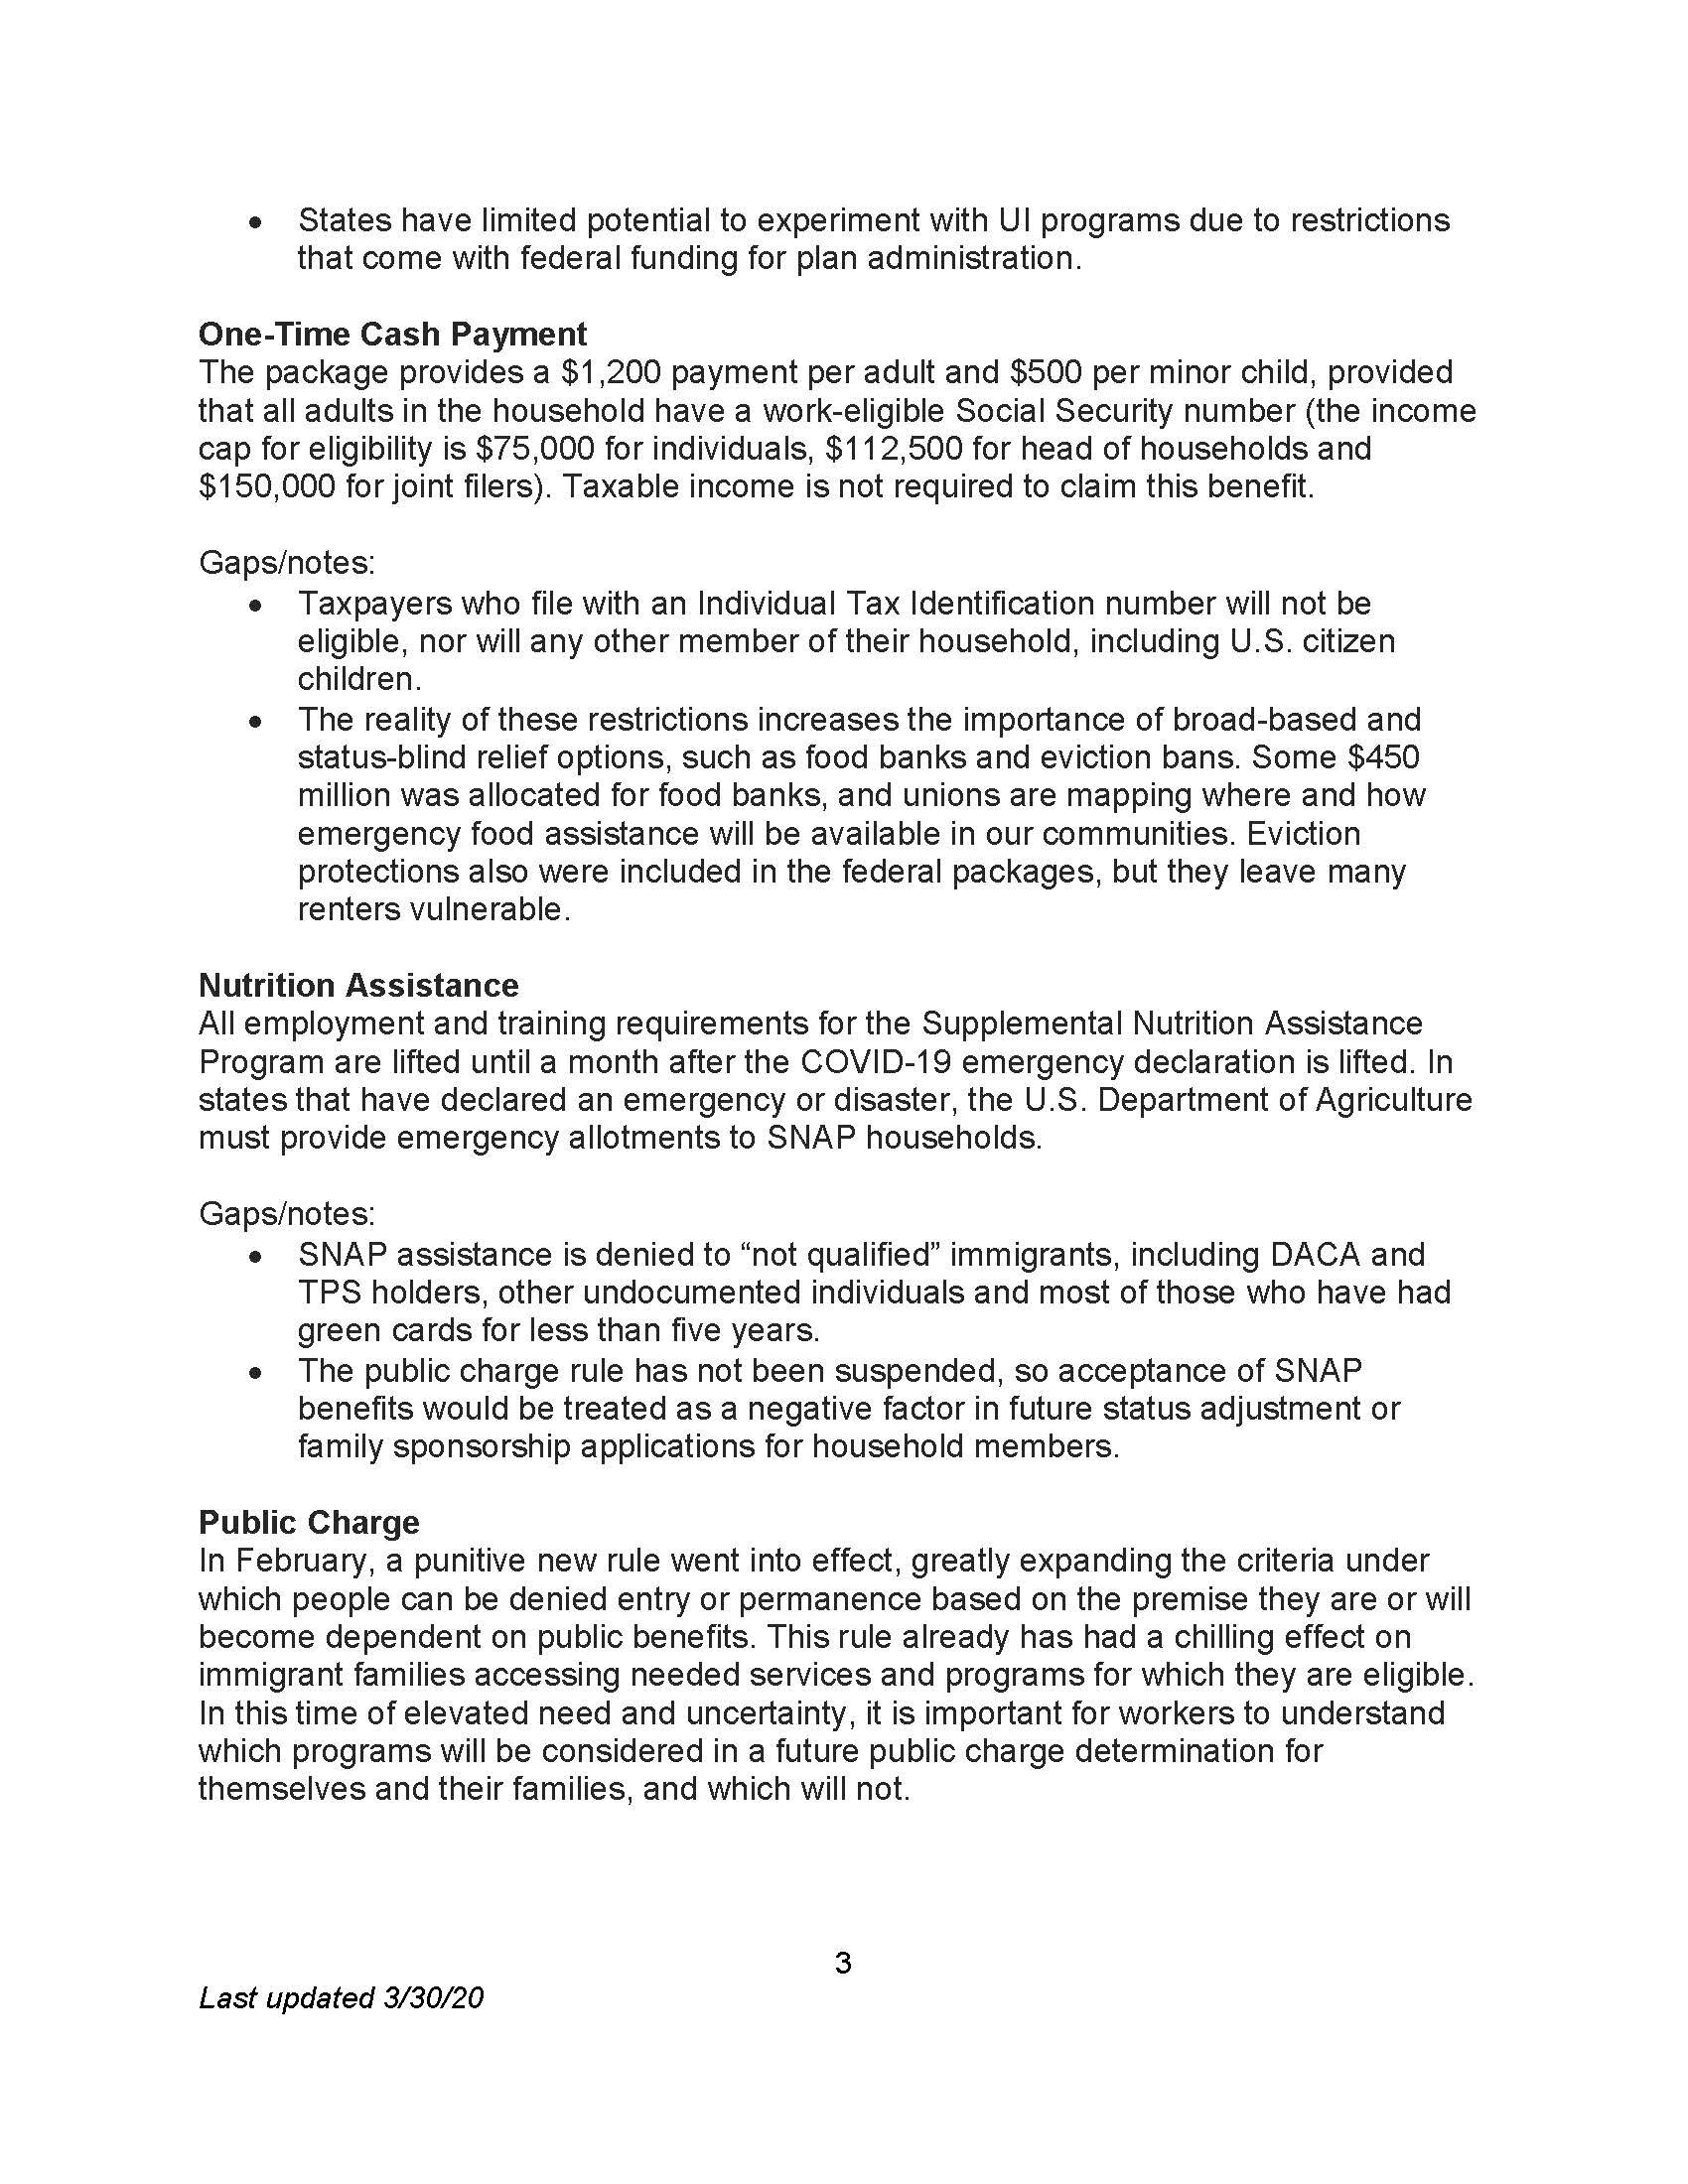 AFL-CIO-COVID-19-and-Immigrant-Workers-Fact-Sheet_Page_3.jpg